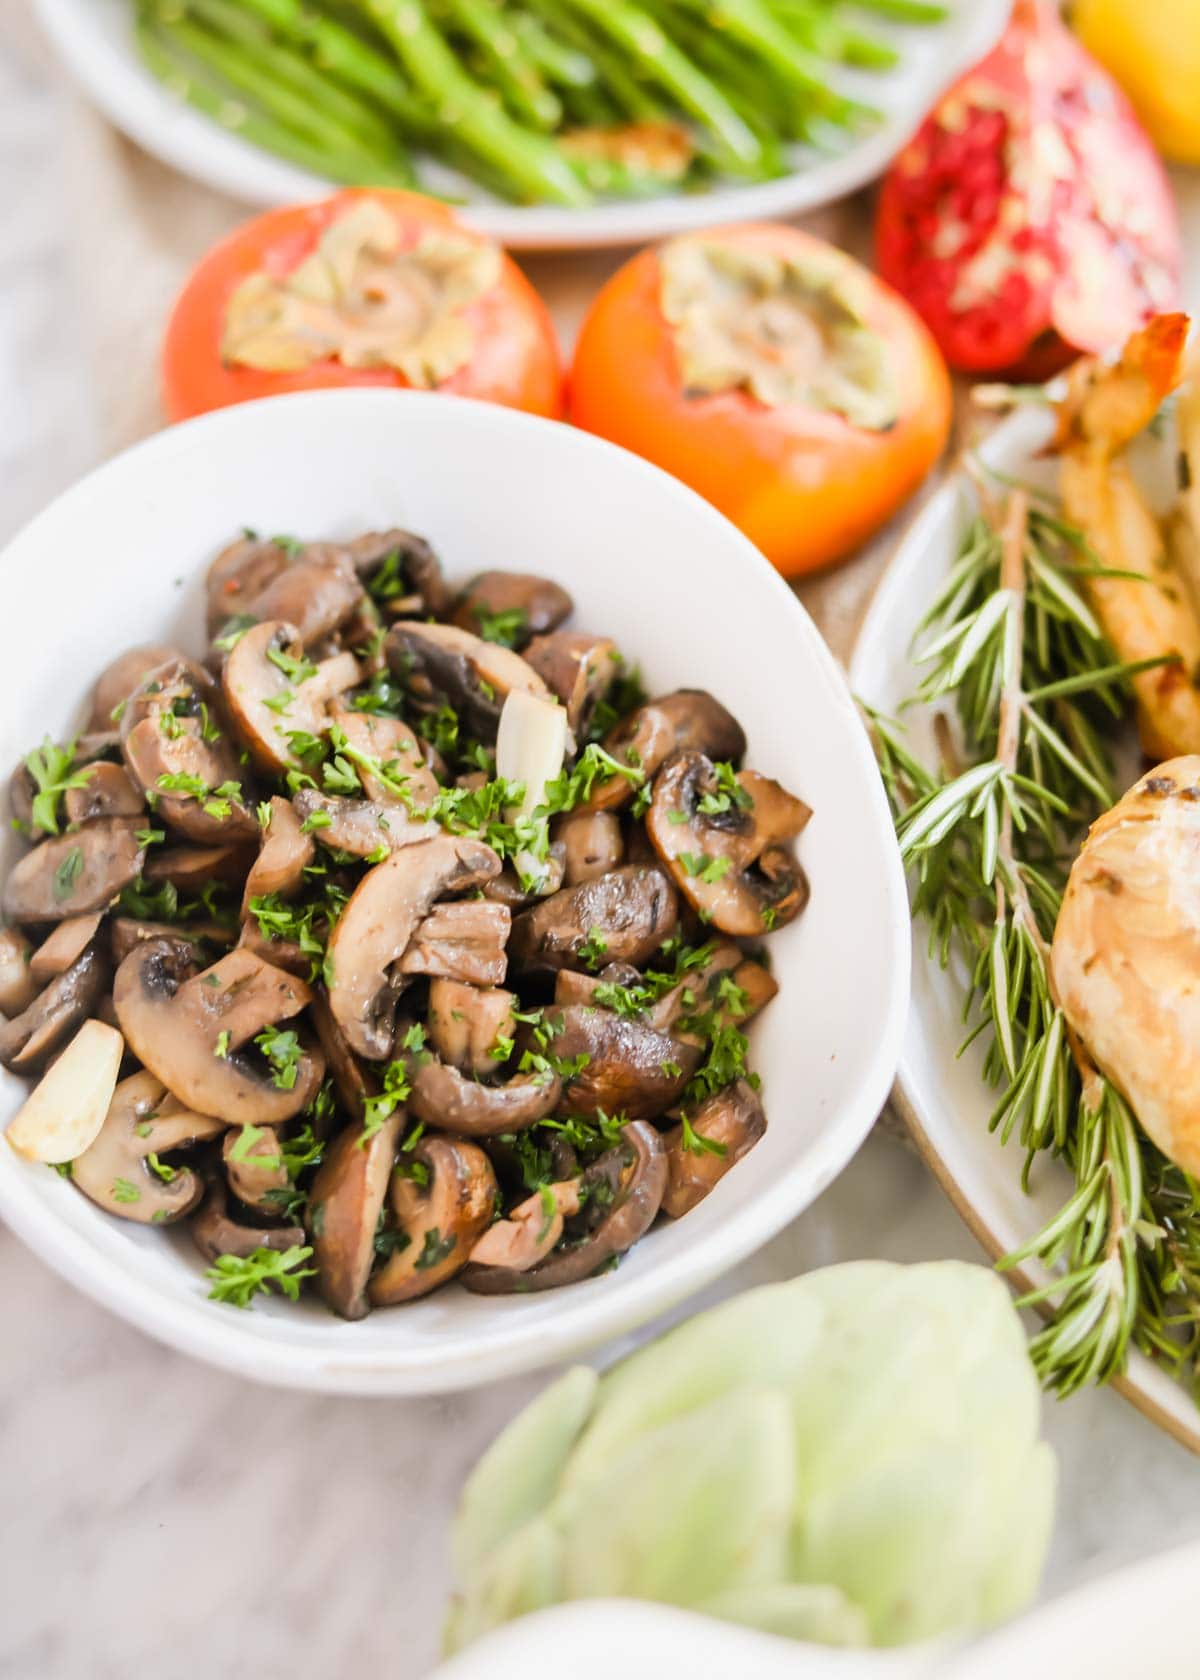 Sautéed mushrooms with White Wine in white bowl.